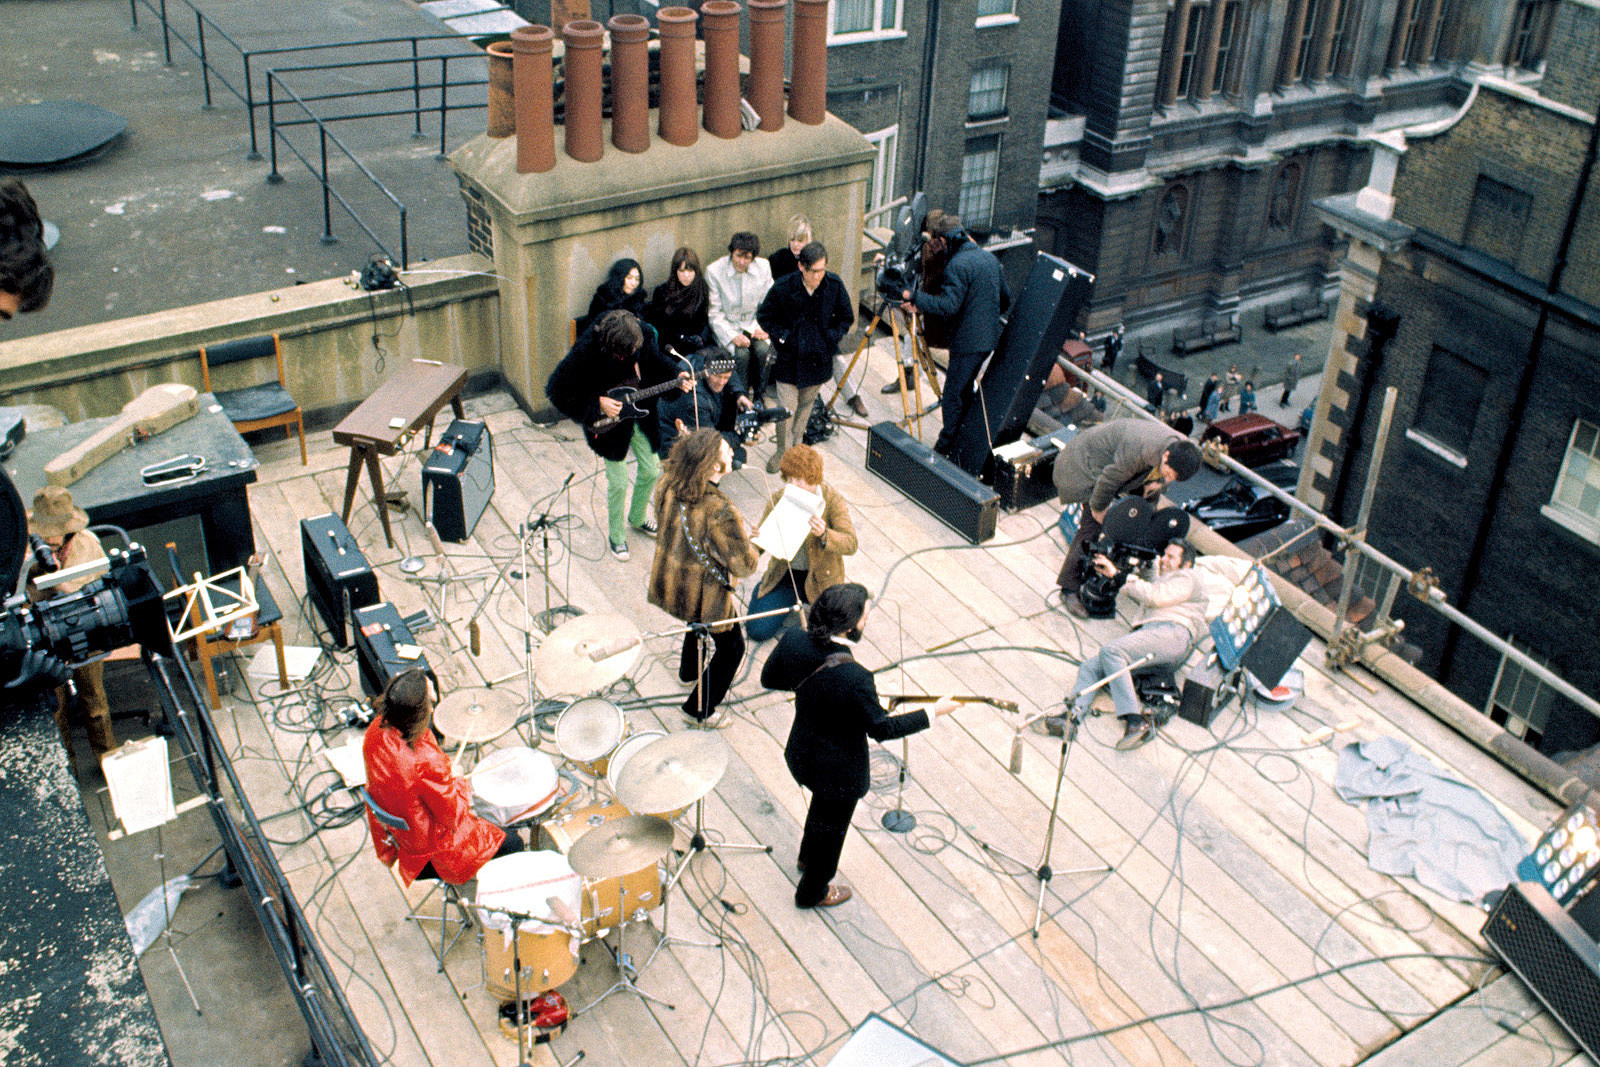 Beatles' Full Rooftop Concert Headed to Streaming Services